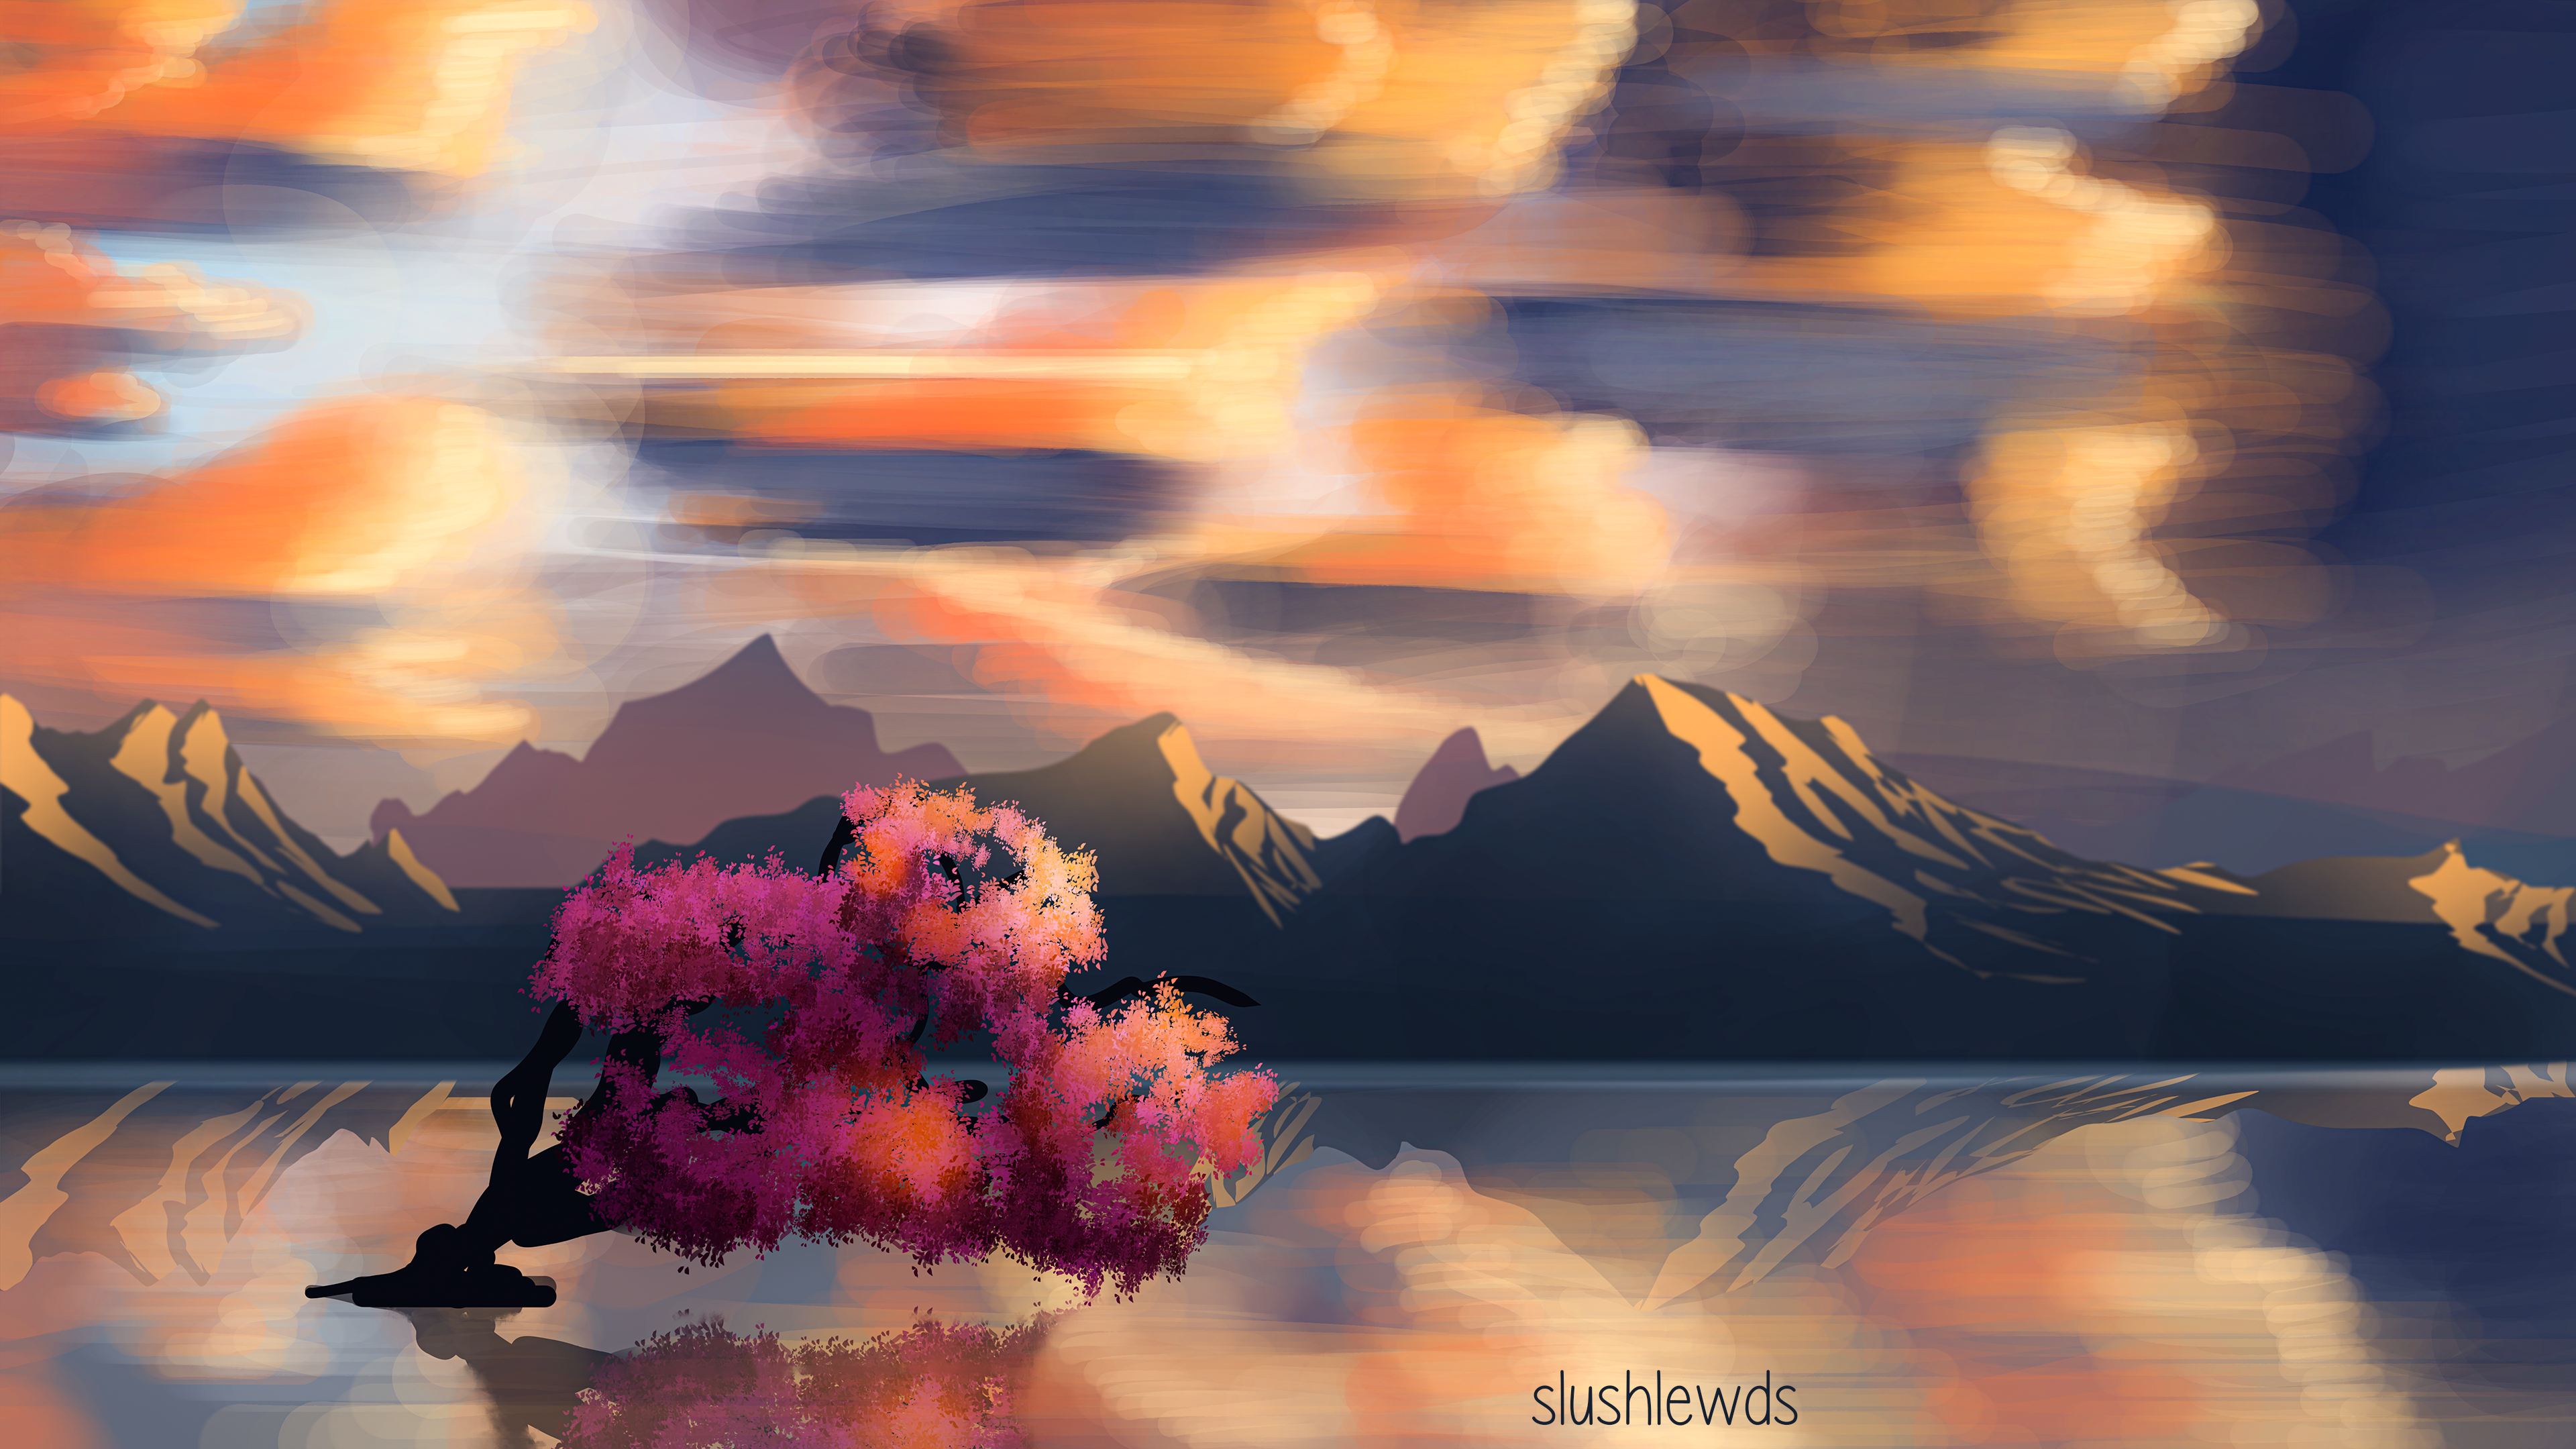 General 3840x2160 cherry blossom lake mountains sunset clouds reflection shining digital art watermarked